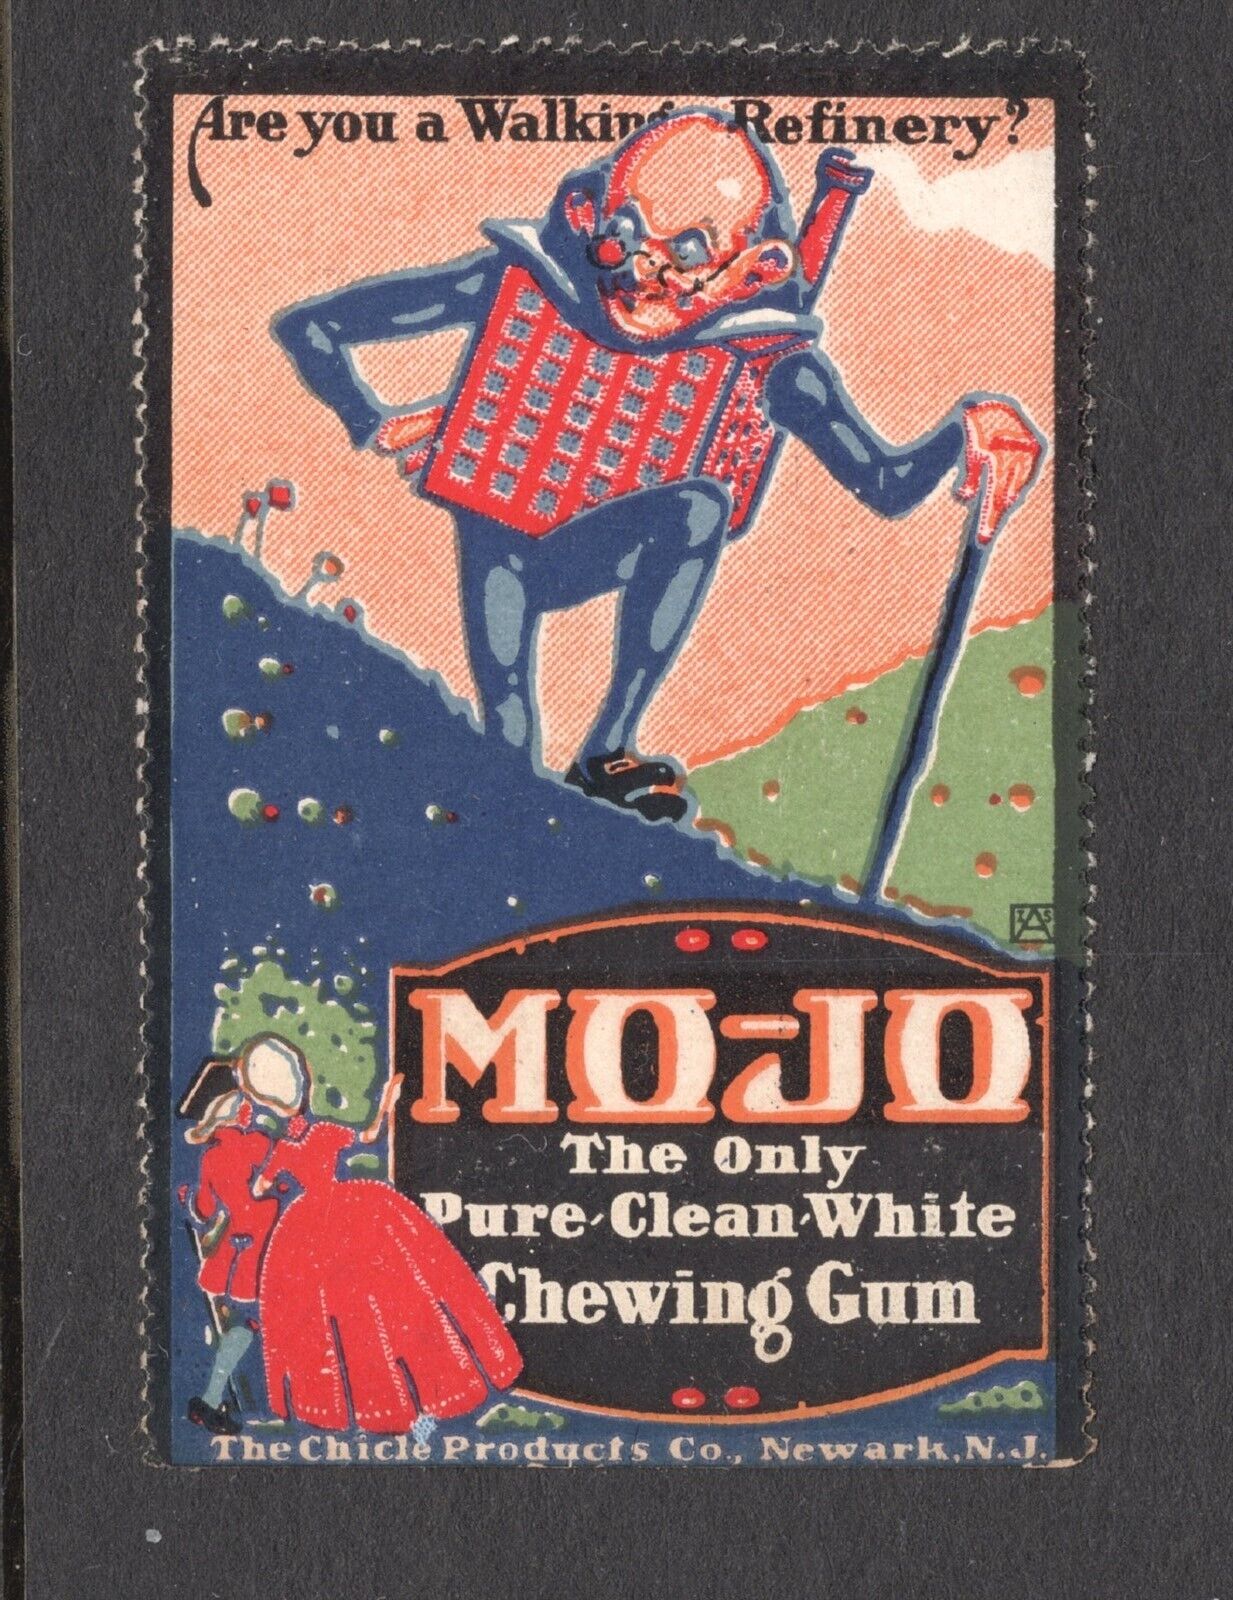 OLD MO-JO CHEWING GUM WEIRD POSTER STAMP 